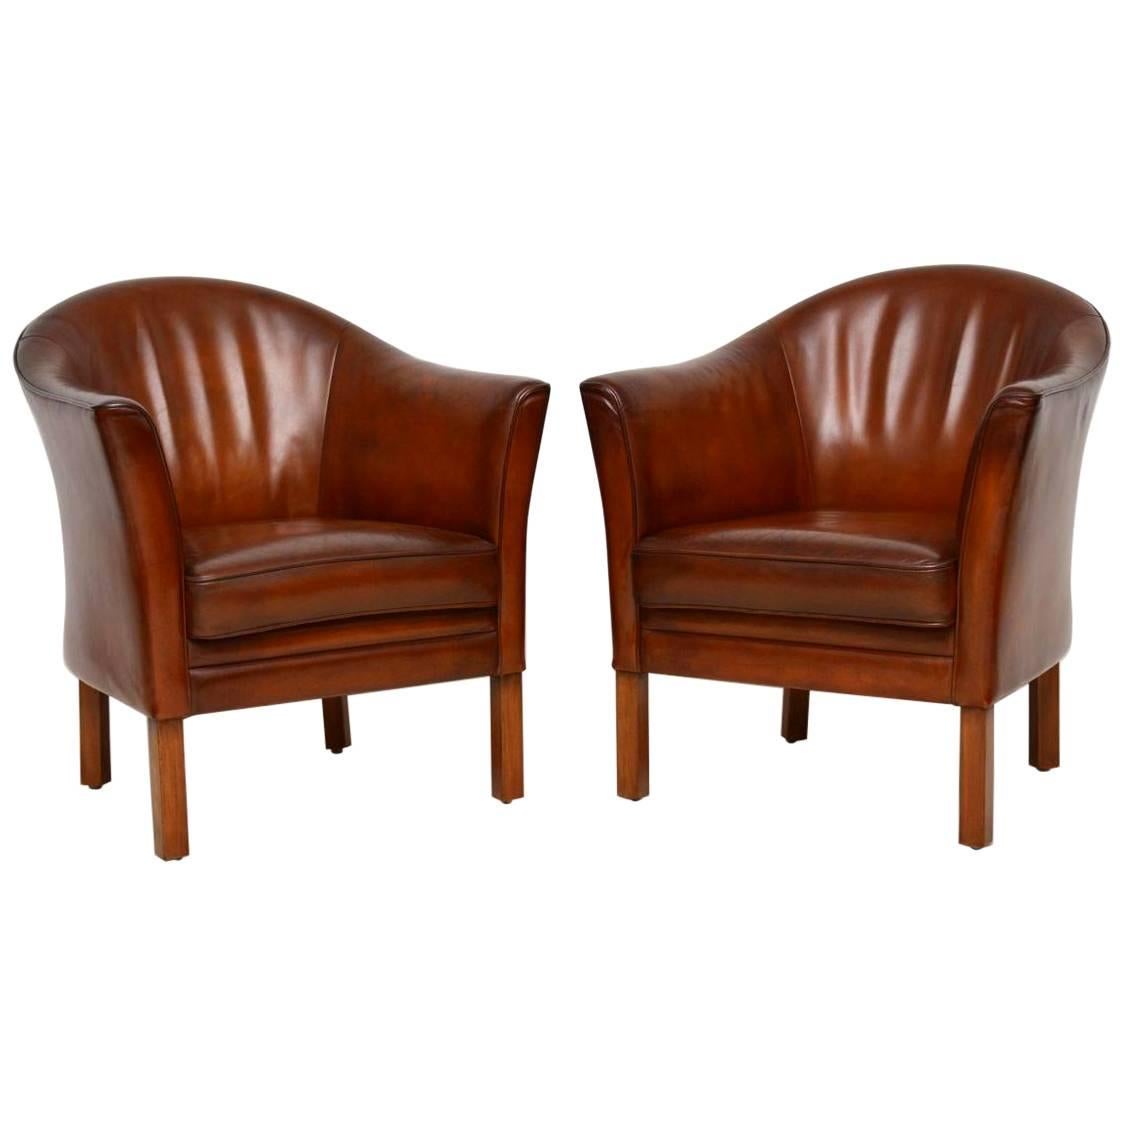 1950s Pair of Danish Vintage Leather Armchairs by Mogens Hansen